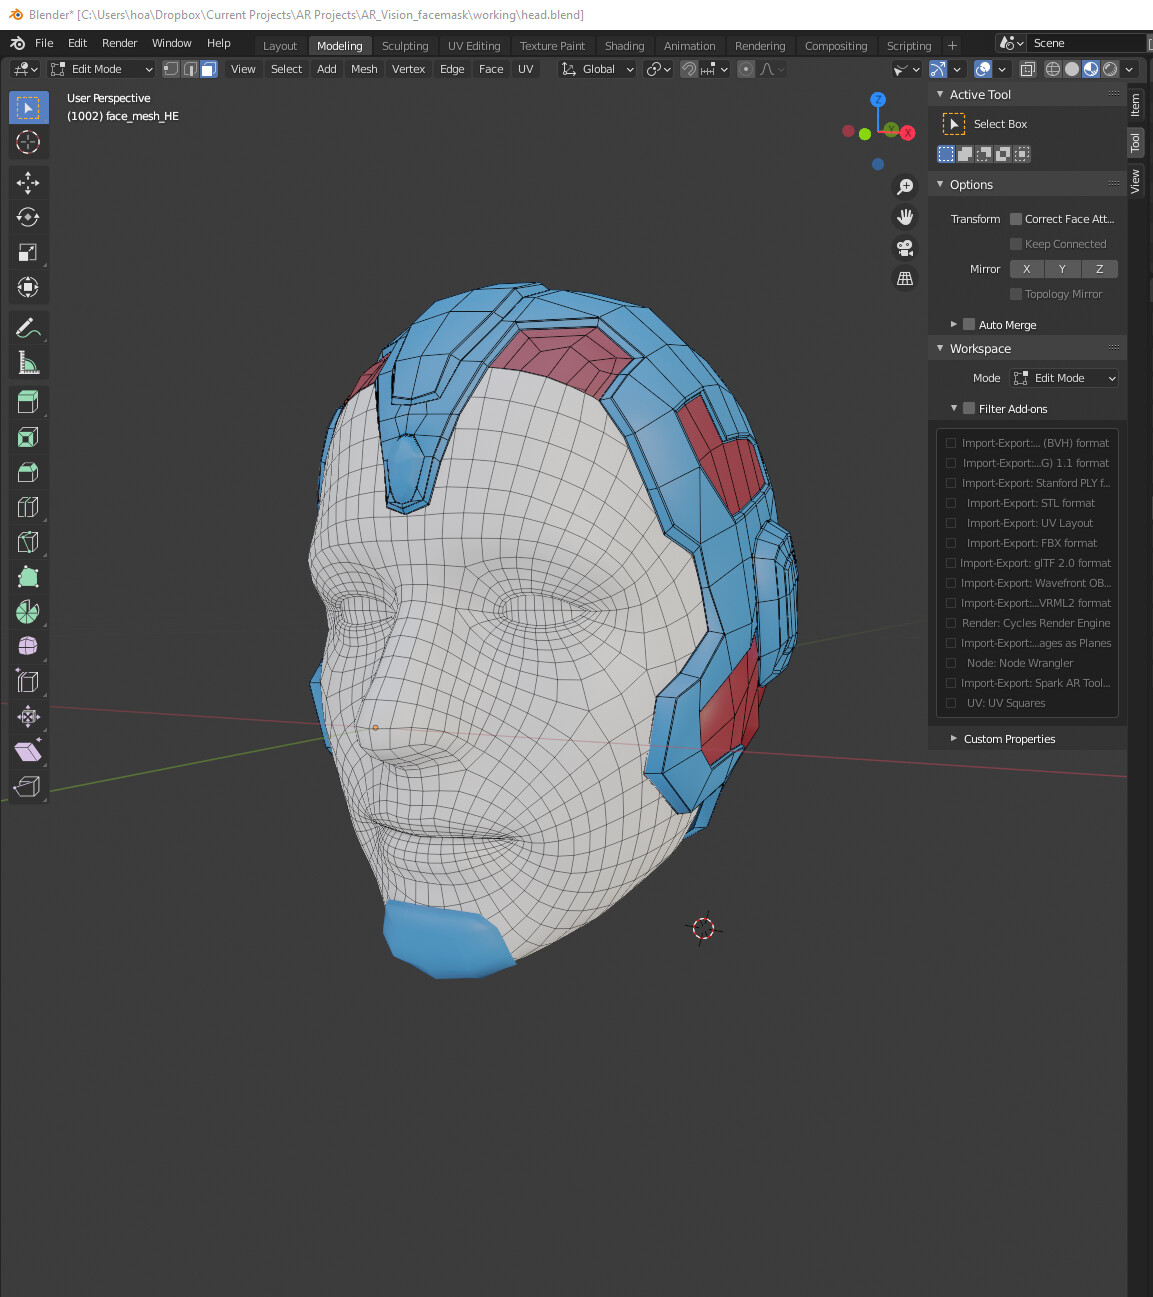 Modeled the details of the head in Blender working off of the AR Kit basic meshes. 